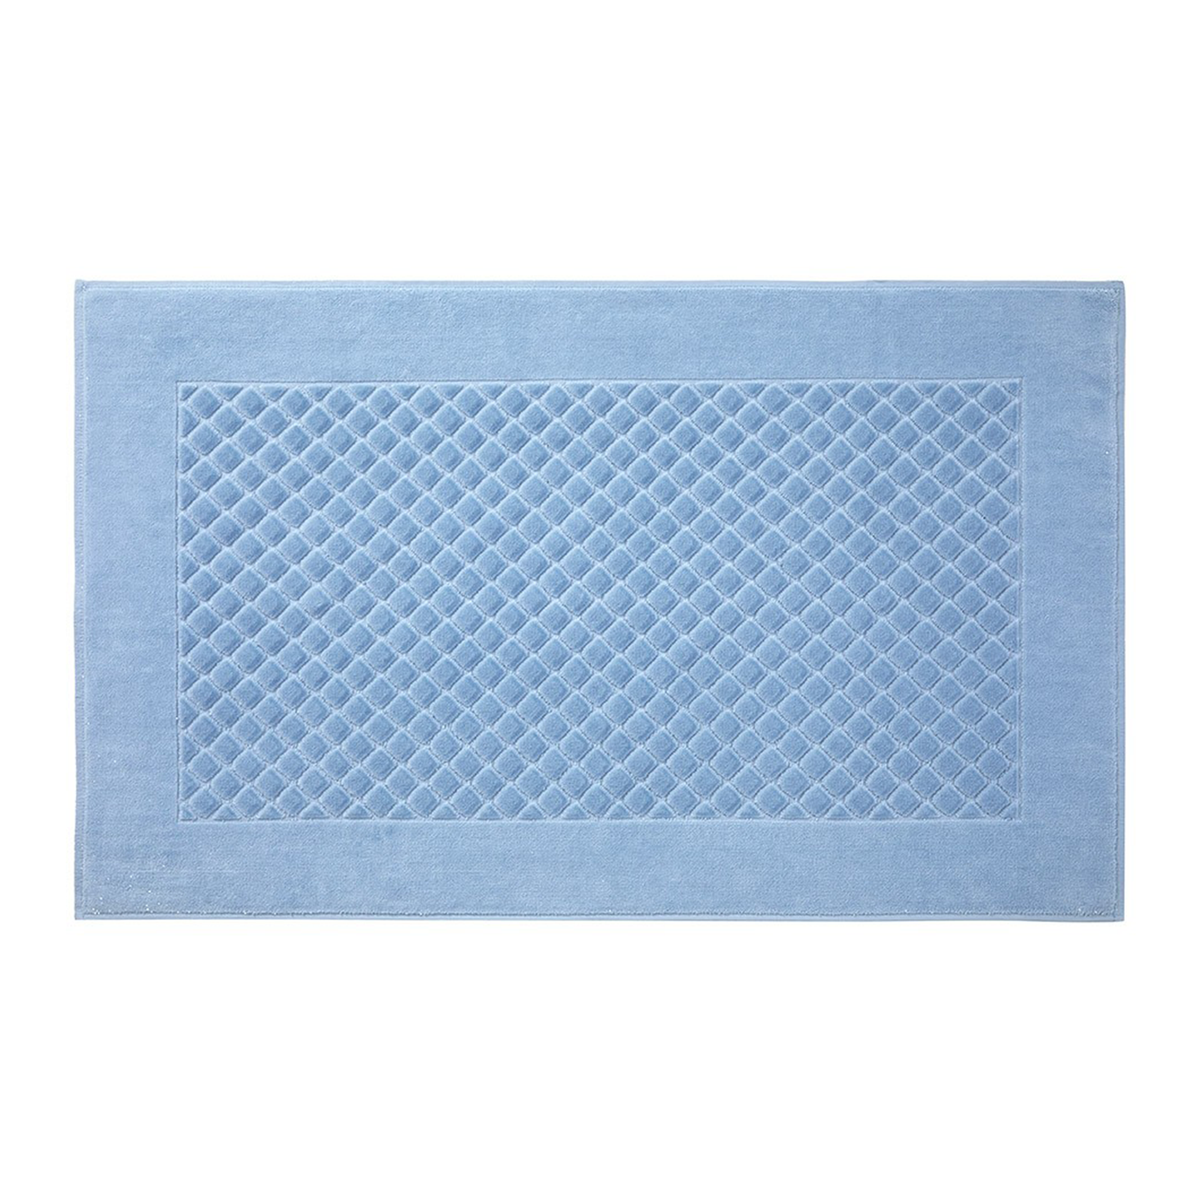 Bath Mat of Yves Delorme Etoile Bath Towels and Mats in Azure Color